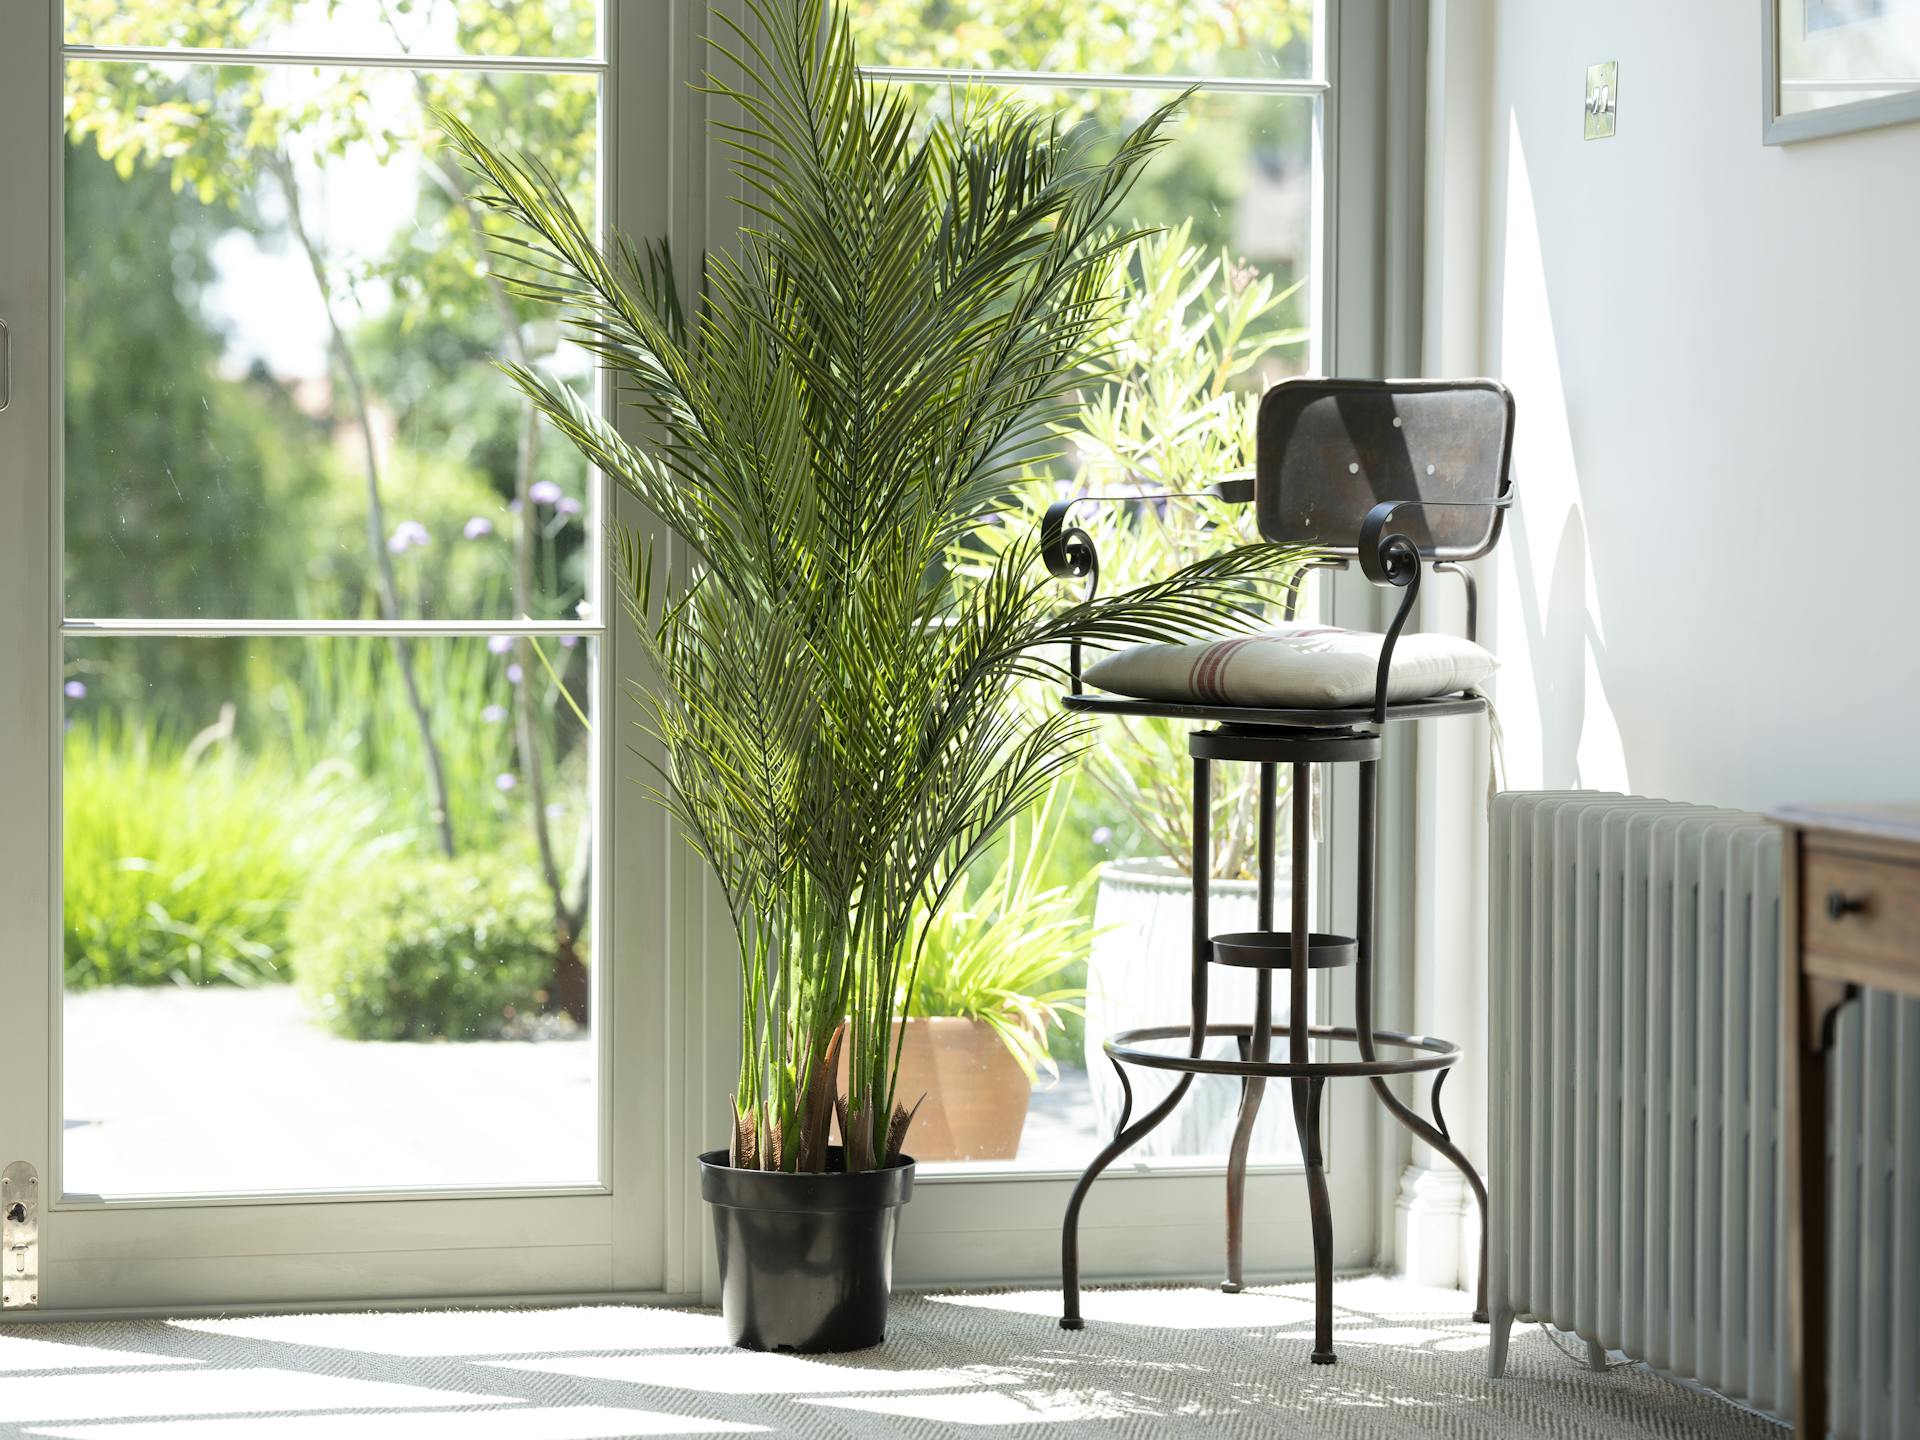 Artificial areca palm by bright window with black metal stool